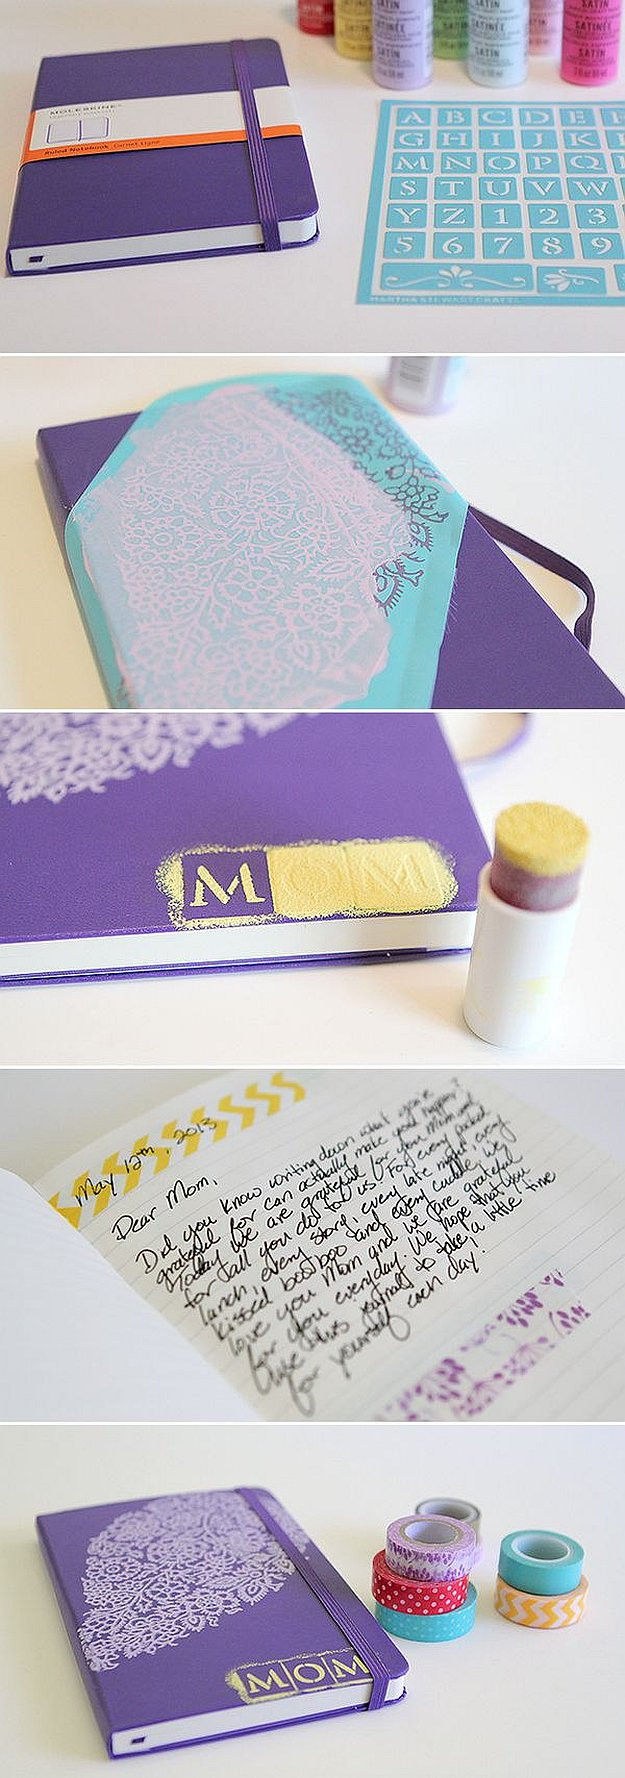 Mom Gifts For Birthday
 10 DIY Birthday Gift Ideas for Mom DIY Projects Craft